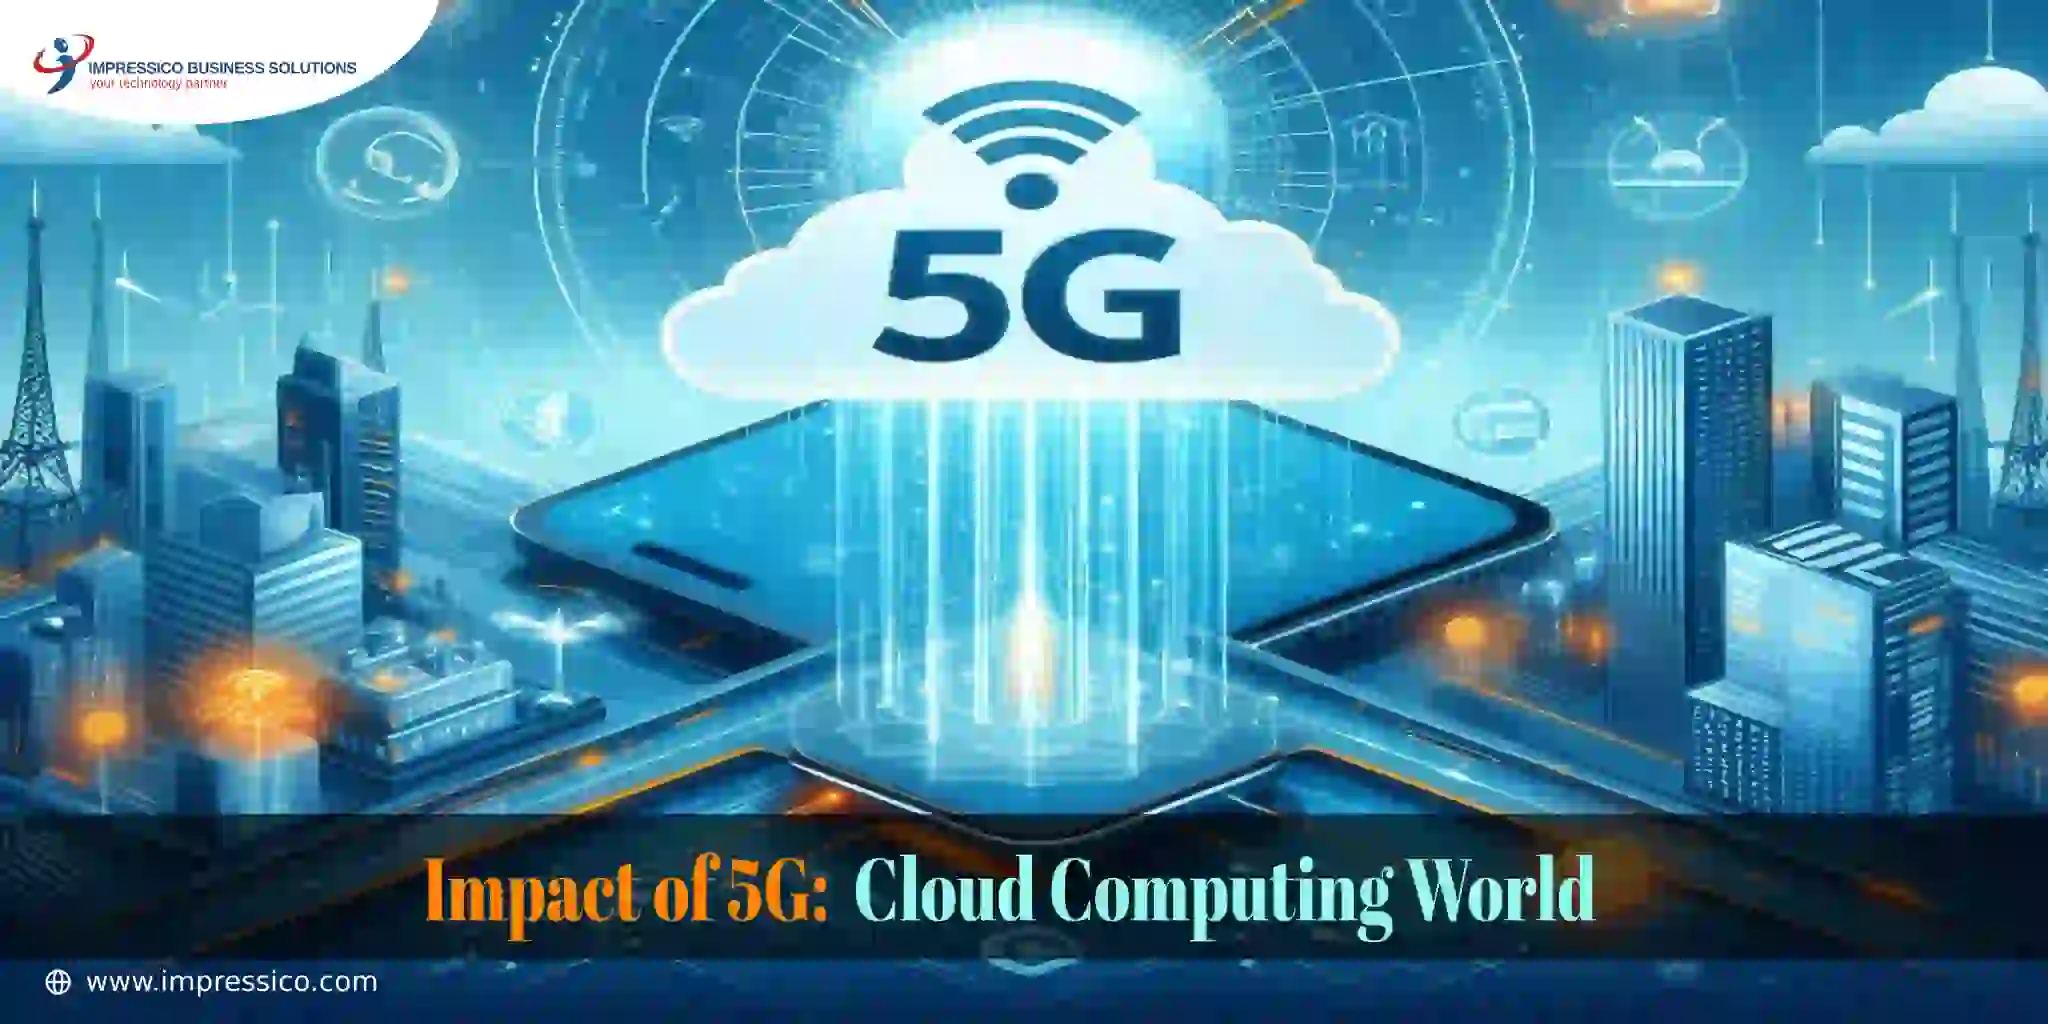 Impact of 5G on the Cloud Computing World